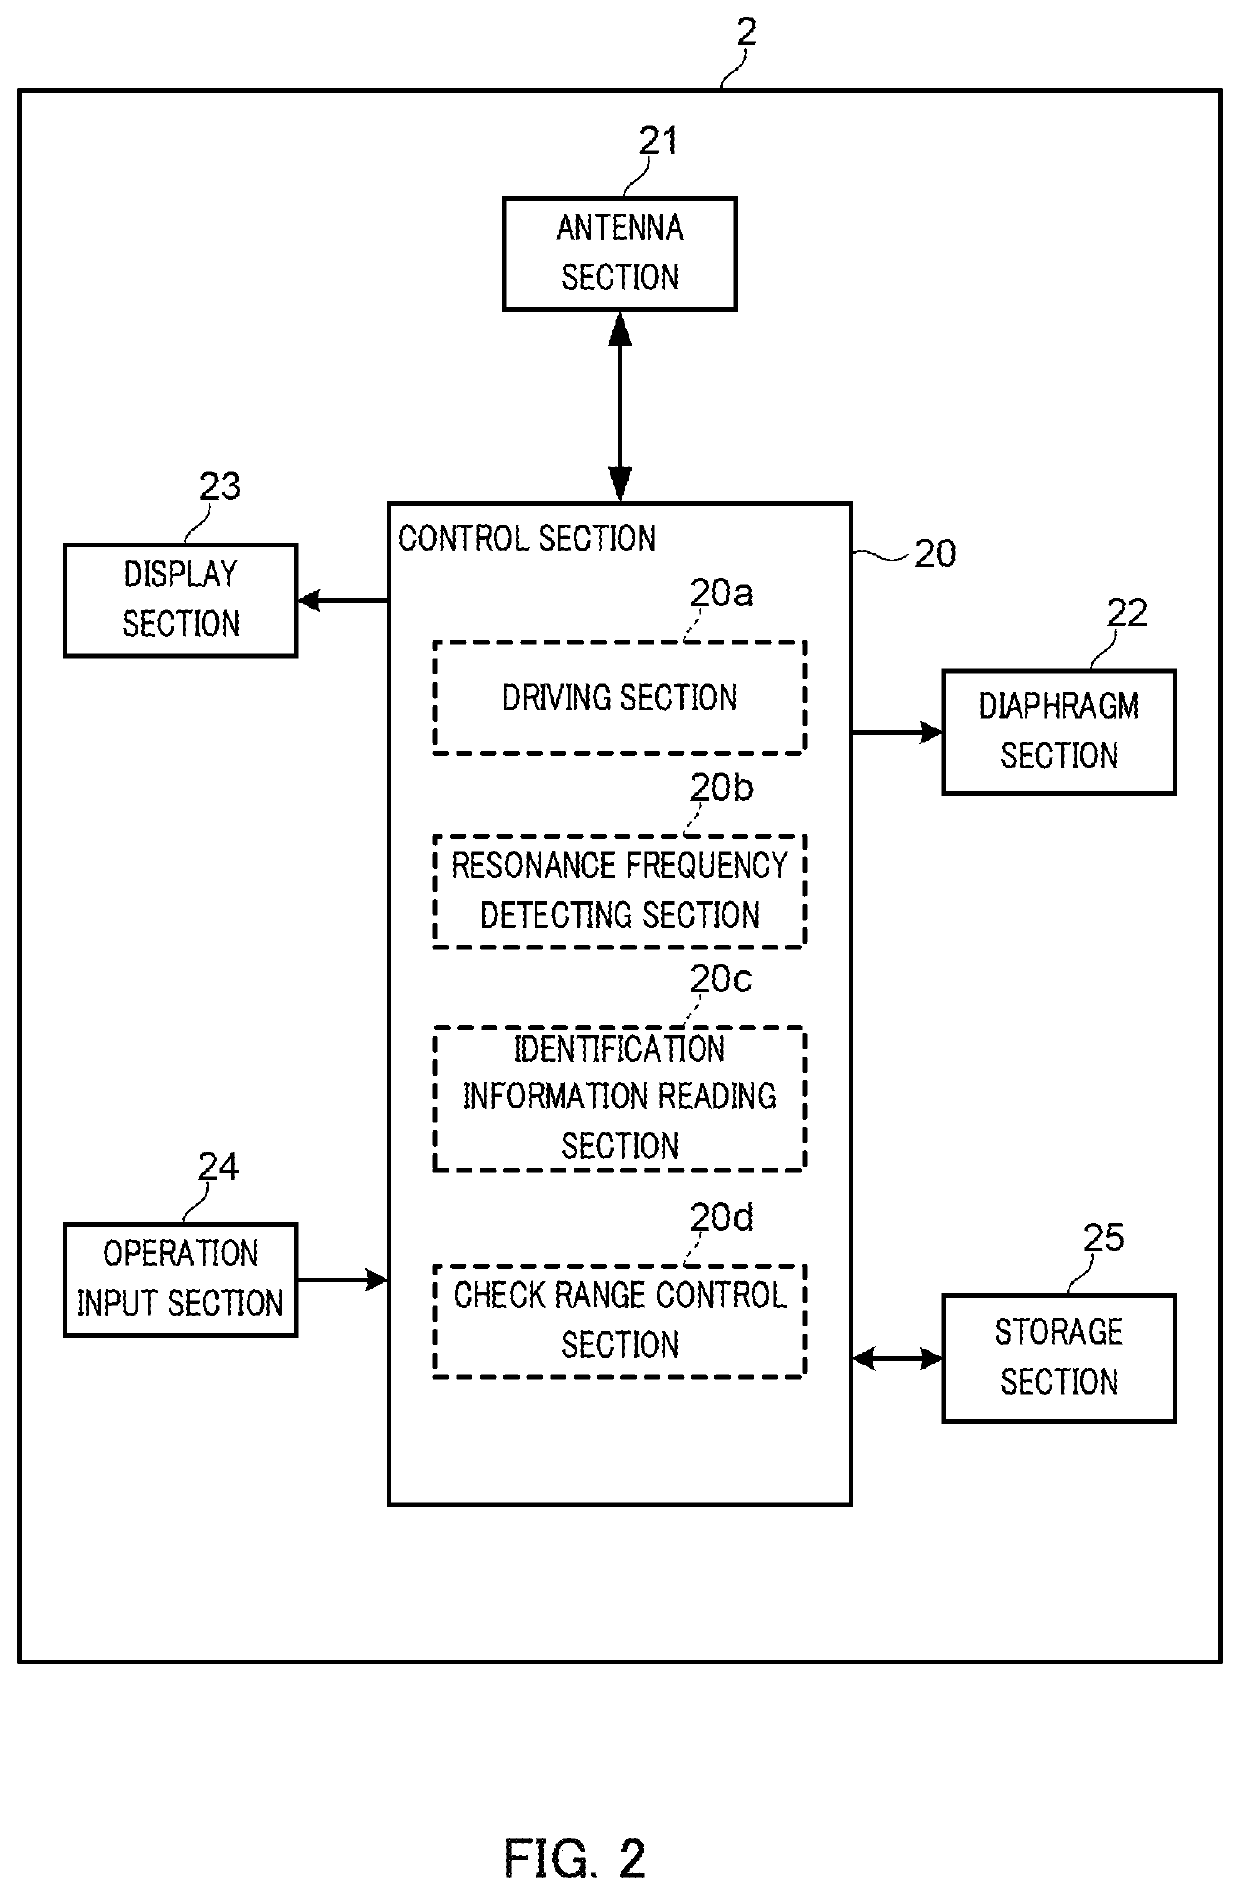 Tag Reader, RFID System, and Method for Reading Identification Information